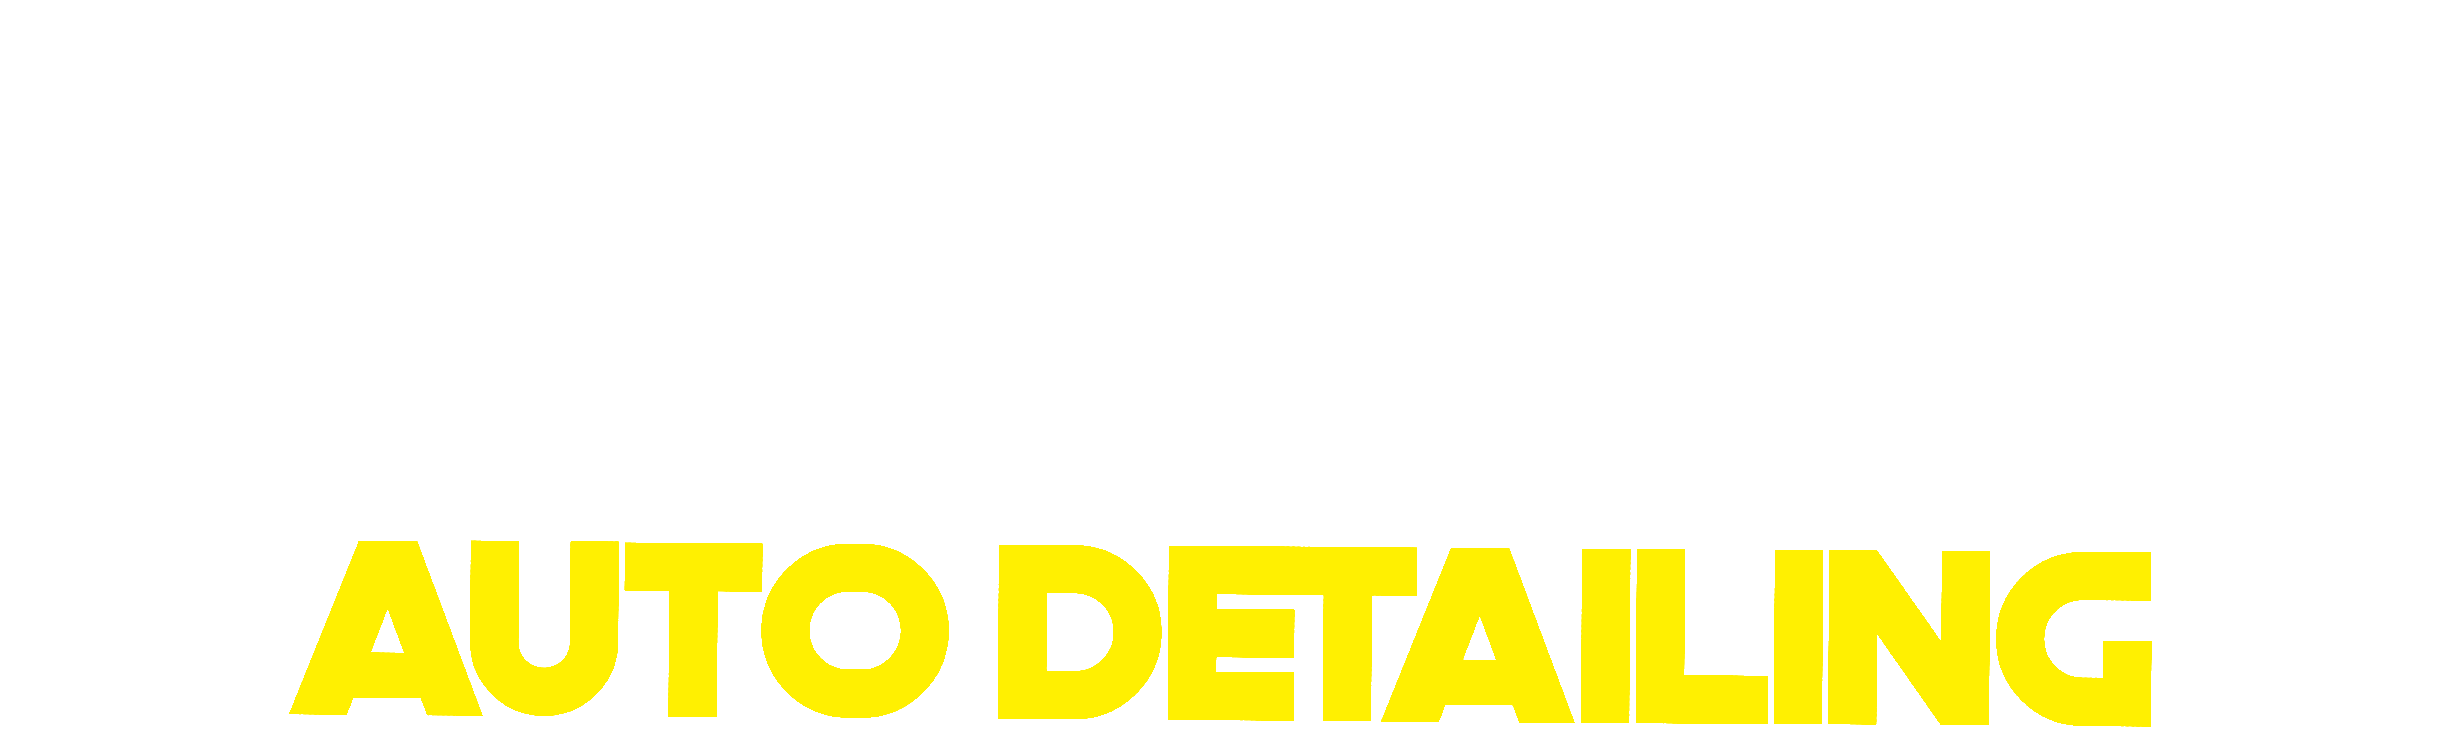 Empire auto detailing based out of Perris Ca